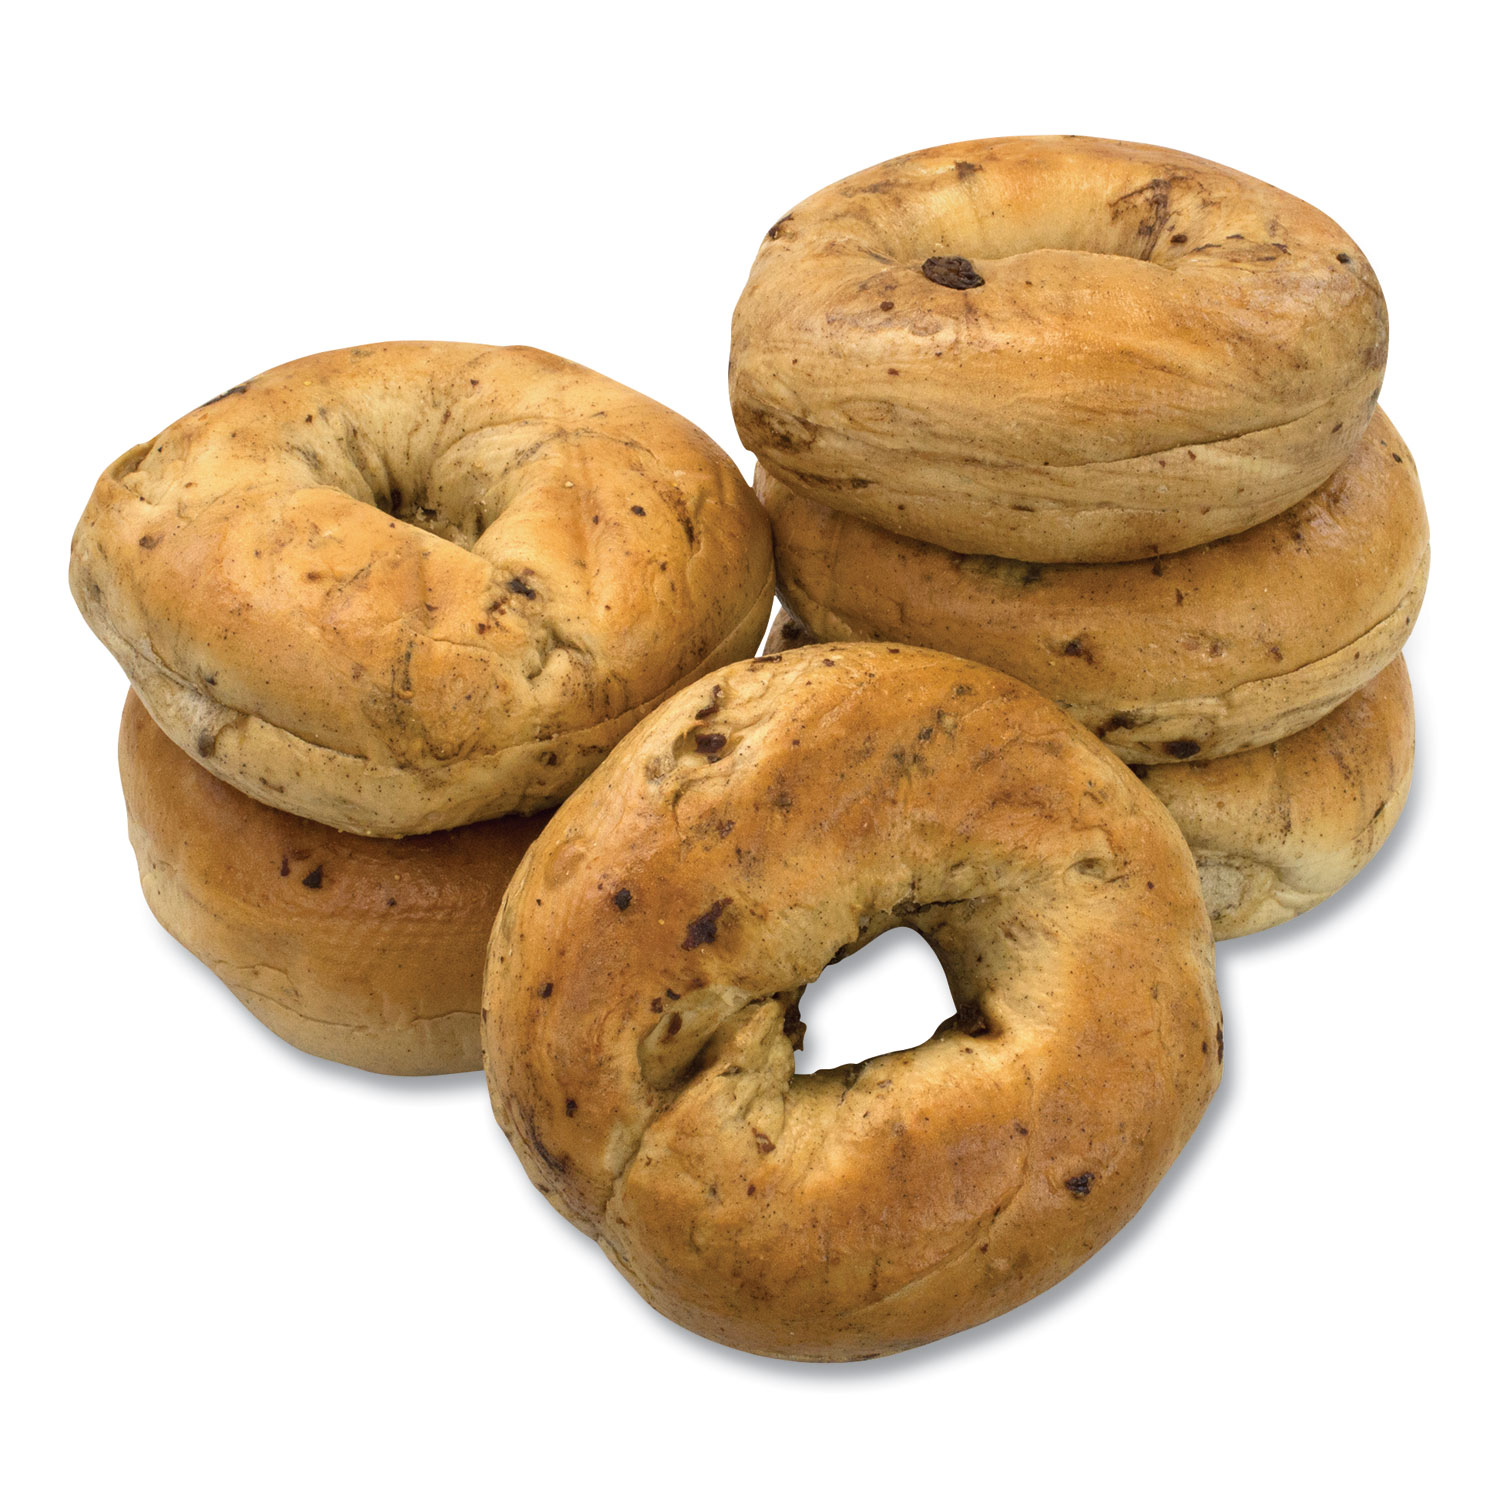  National Brand 172674 Fresh Cinnamon Raisin Bagels, 6/Pack, Free Delivery in 1-4 Business Days (GRR90000008) 